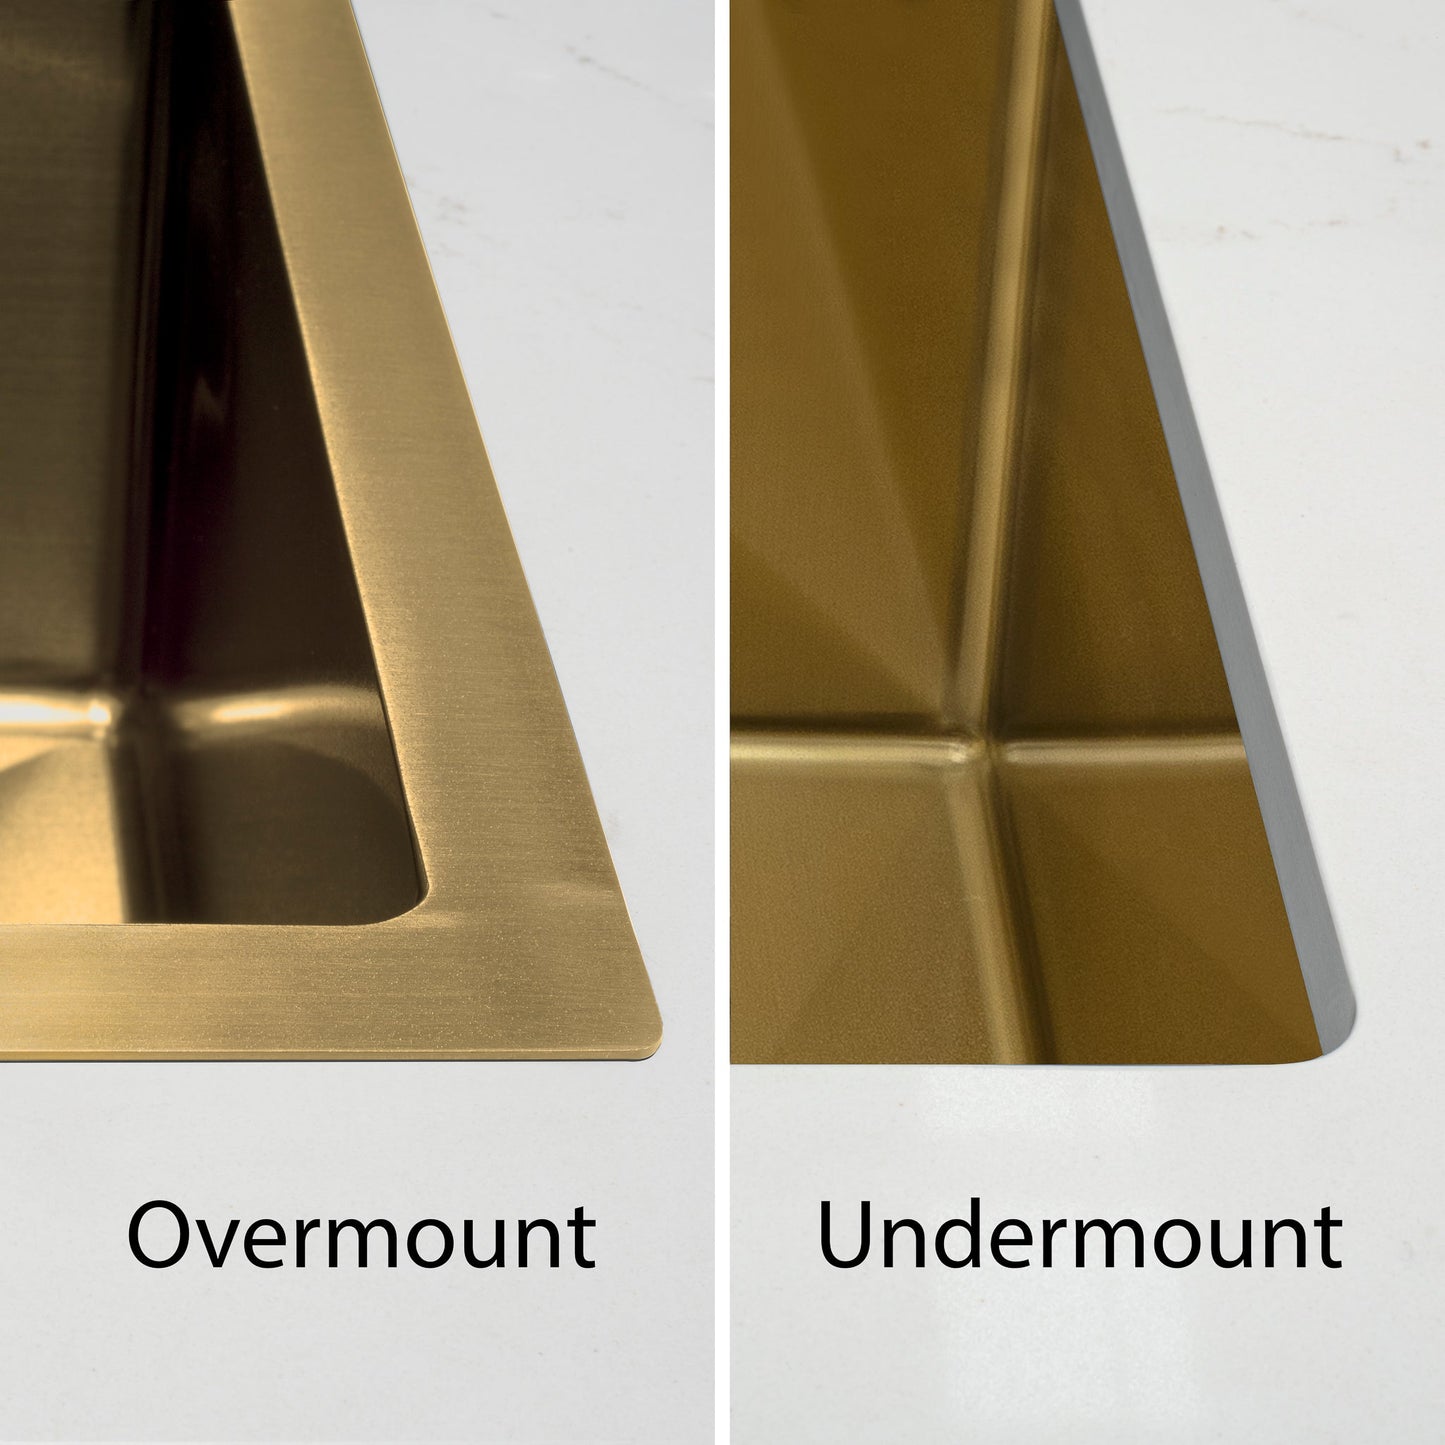 Retto II 1190mm x 450mm x 230mm Stainless Steel Double Sink with Drainer, Brushed Brass Gold